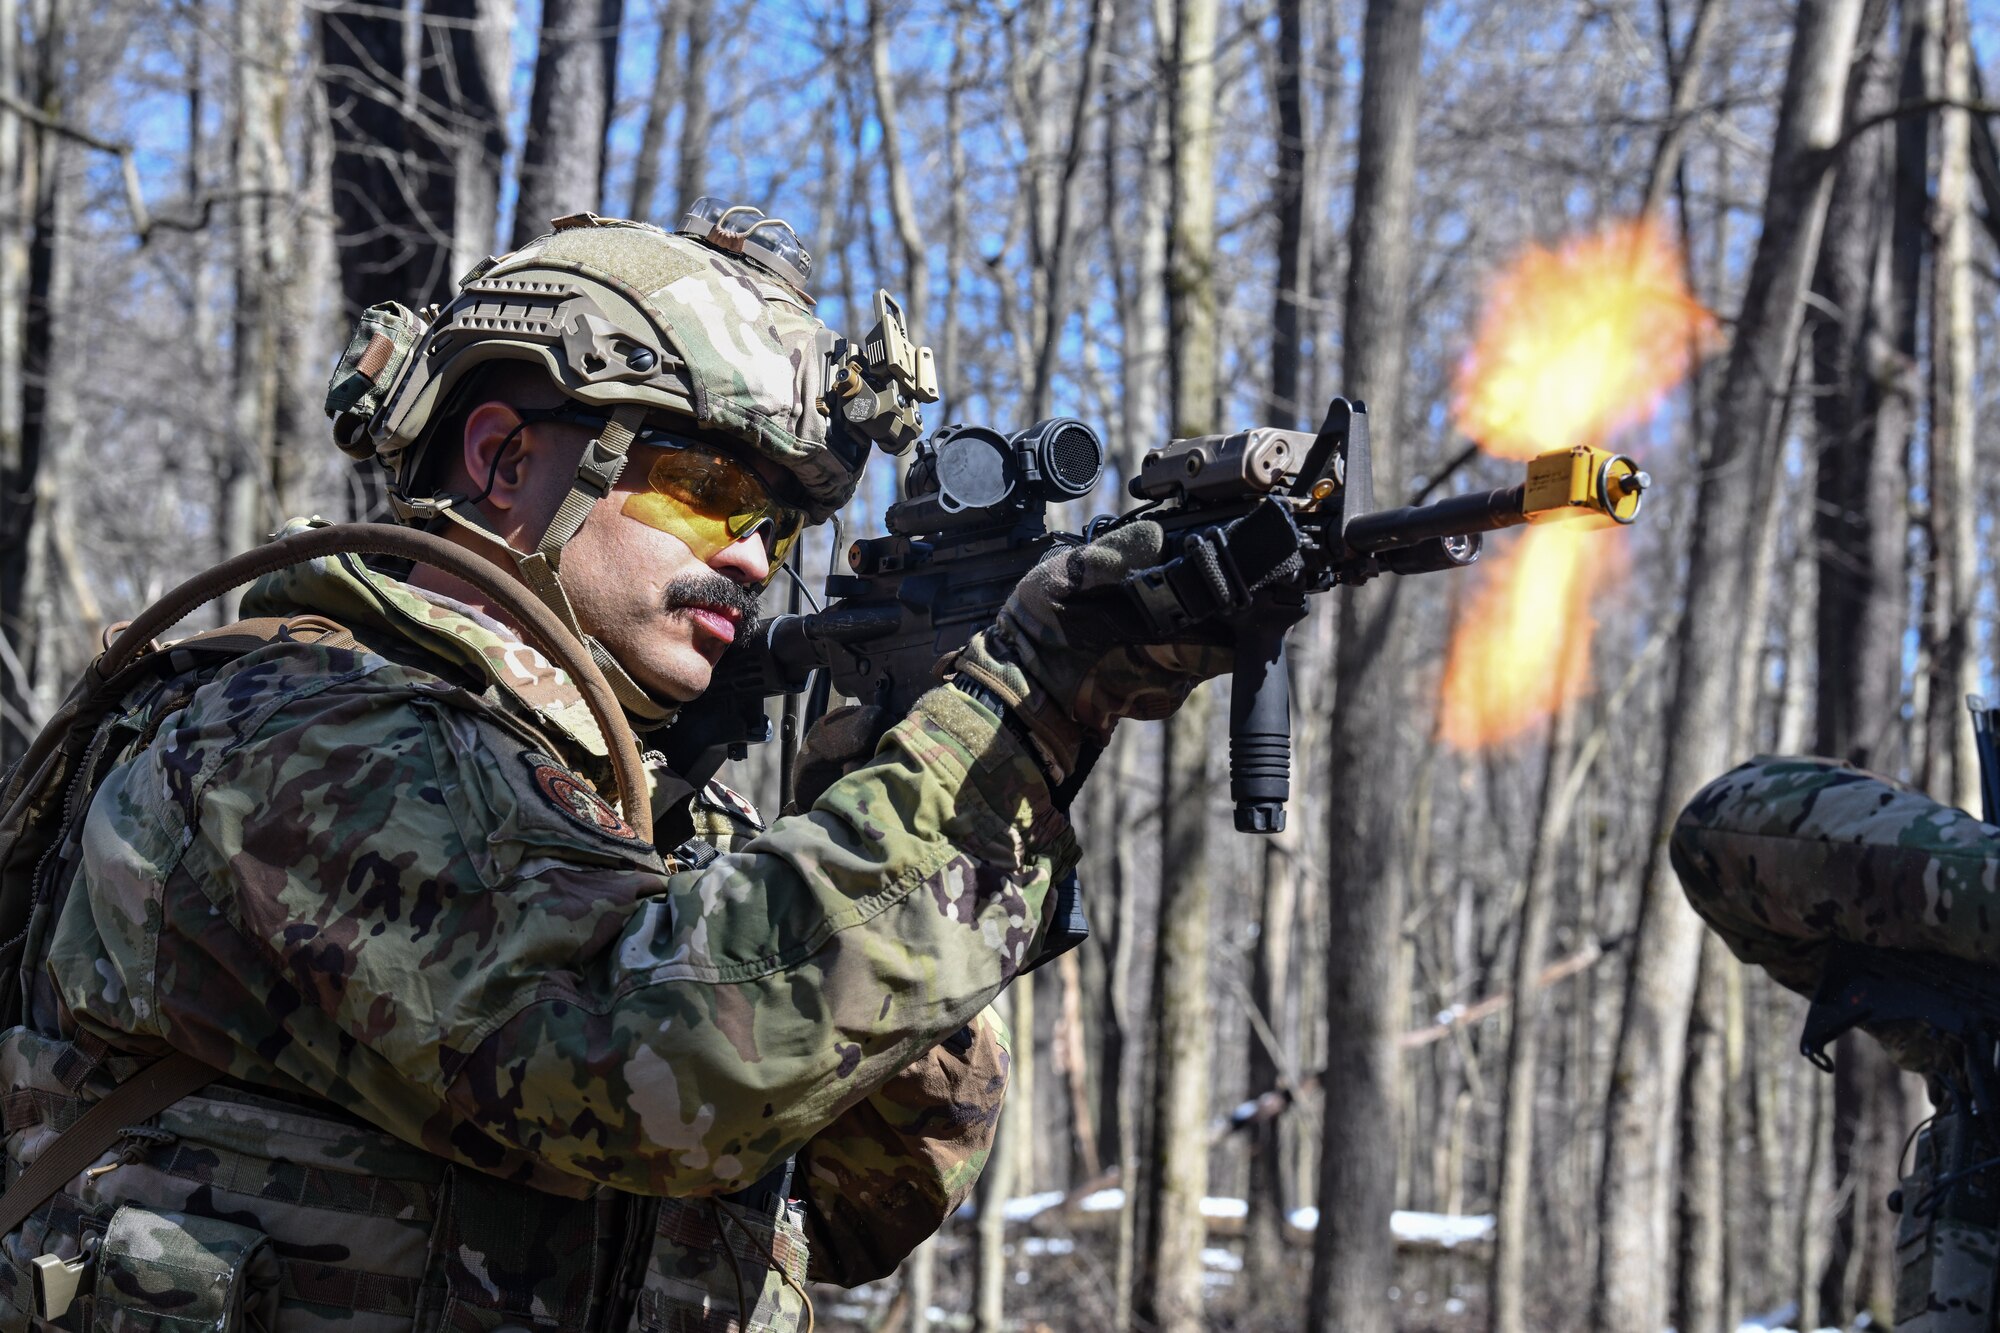 Tech. Sgt. Hanlet Contreras, a fireteam member assigned to the 459th Security Forces Squadron, Joint Base Andrews, Maryland, fires an M4 carbine on March 15, 2023, at Camp James A. Garfield Joint Military Training Center, Ohio.